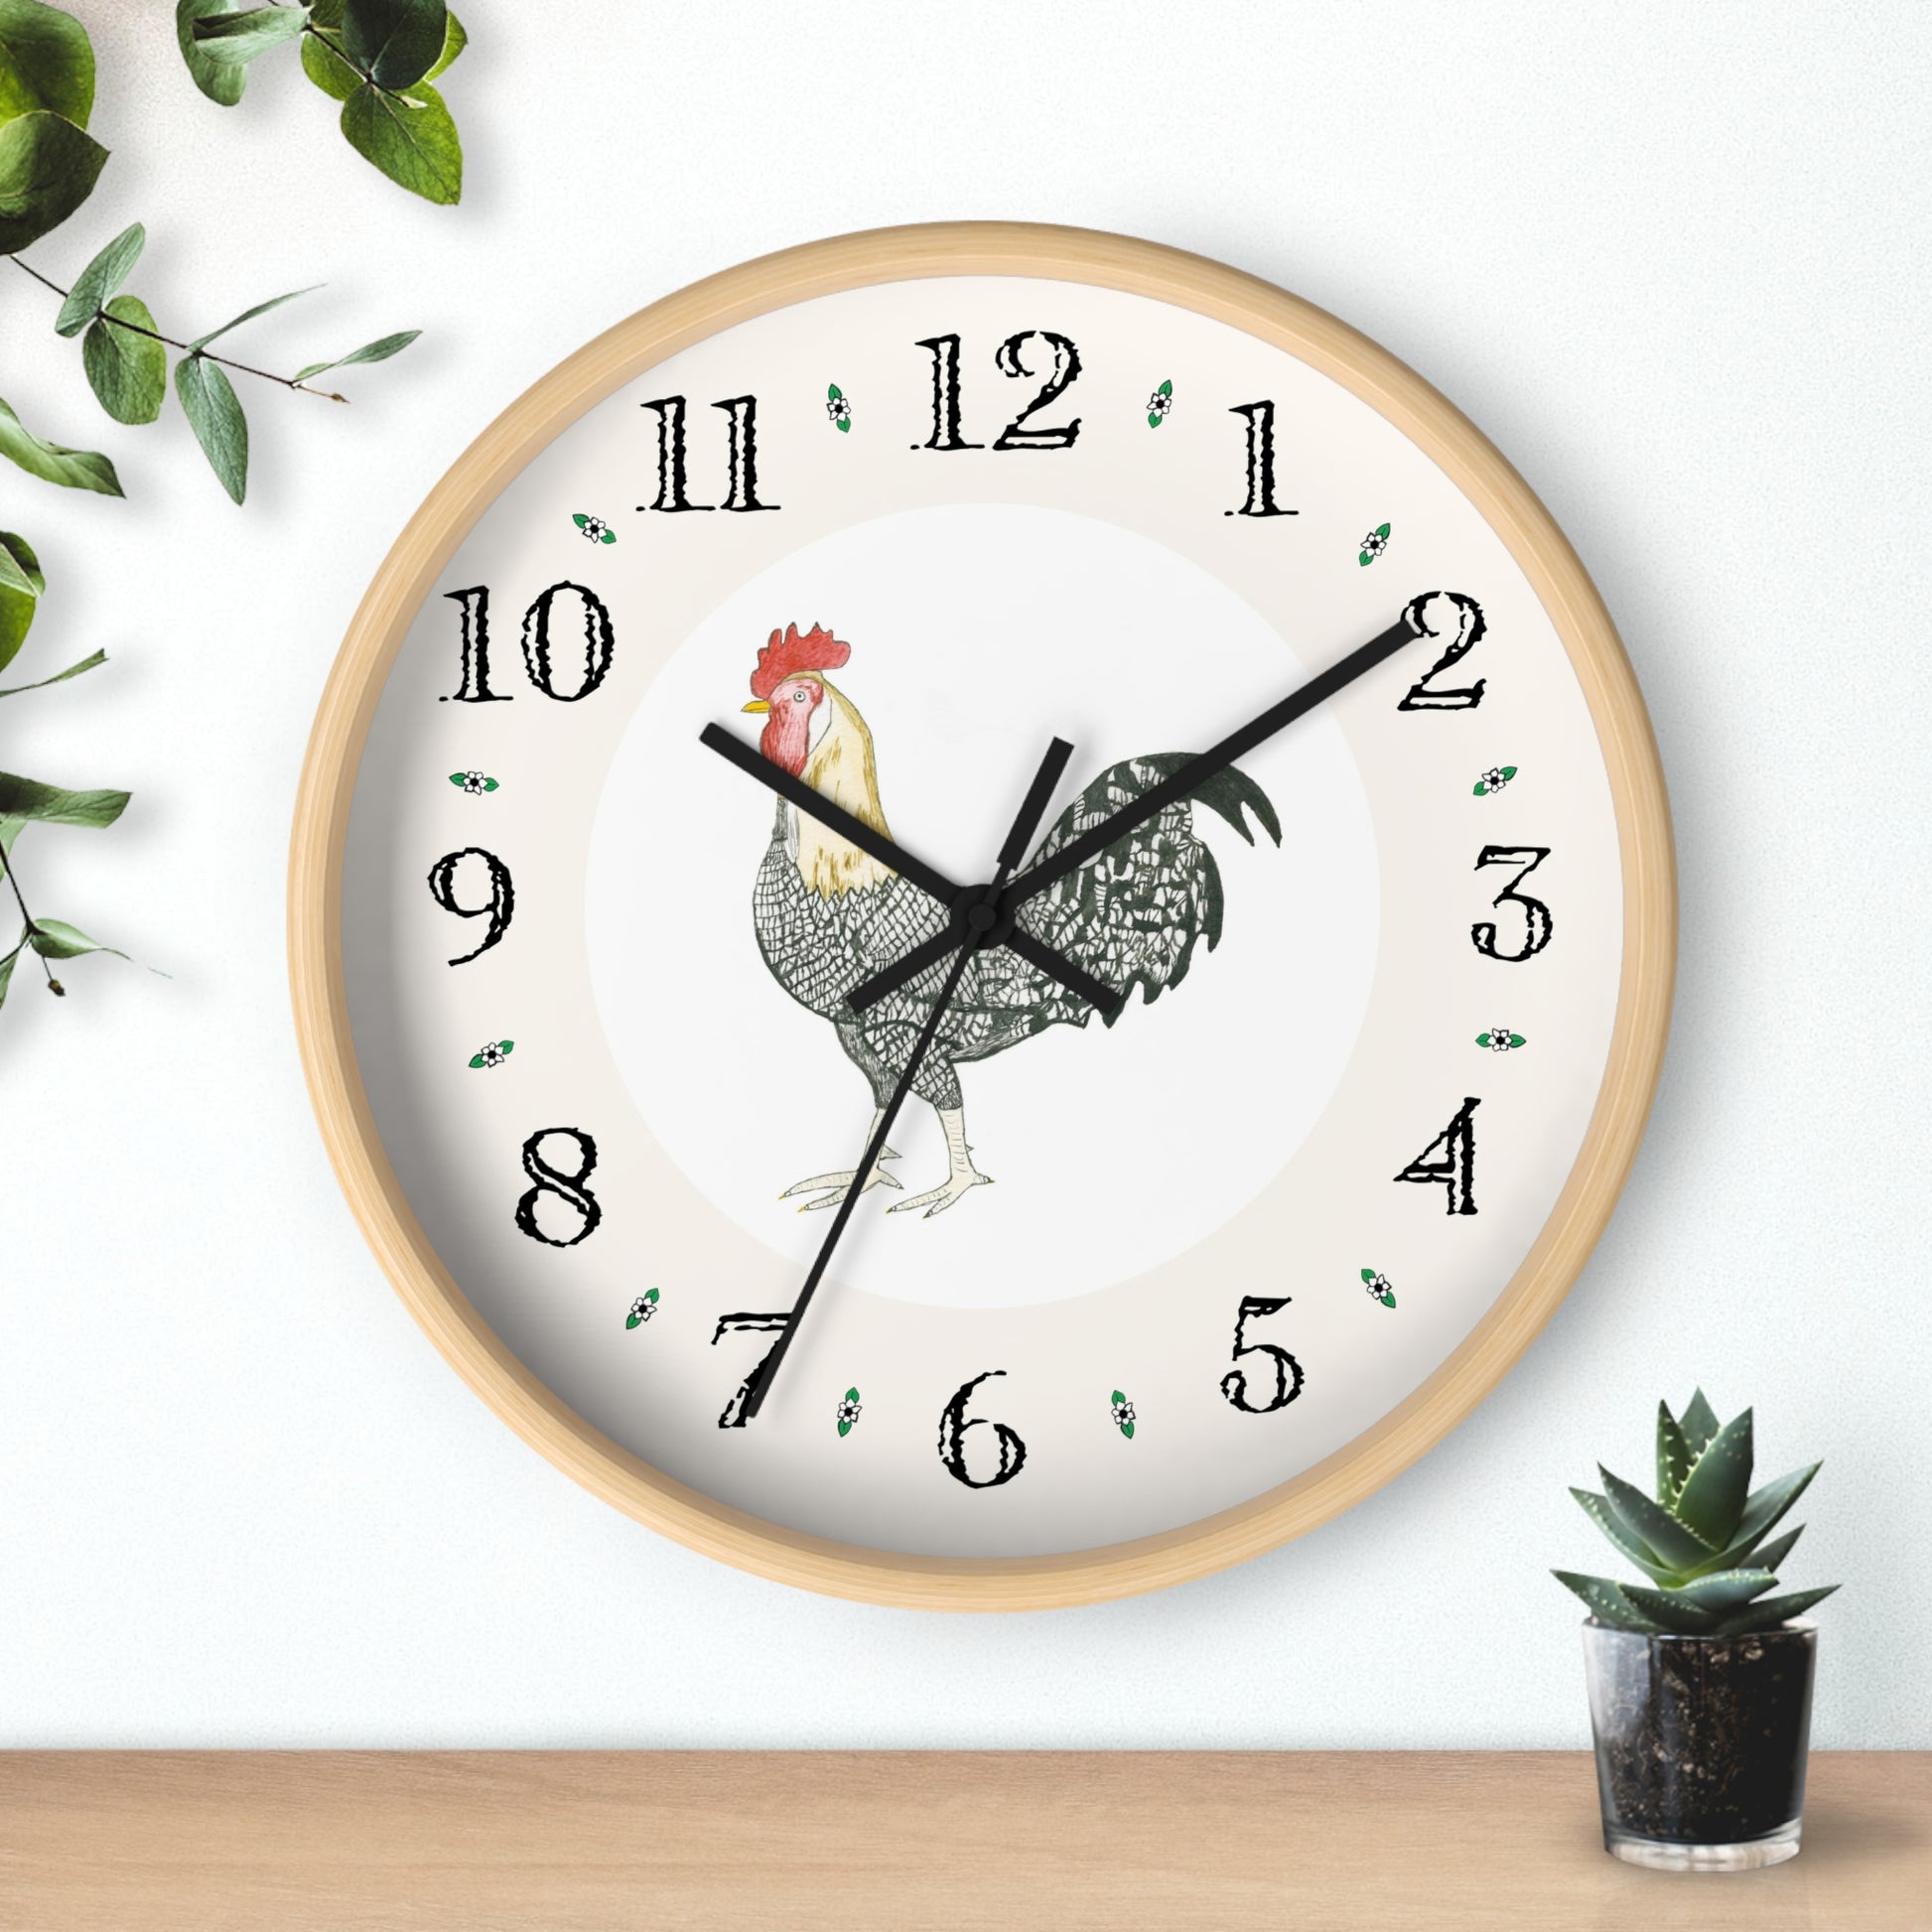 The Charlie Rooster Heirloom Designer Clock will add a unique touch to any room. Charlie will help keep you on time!